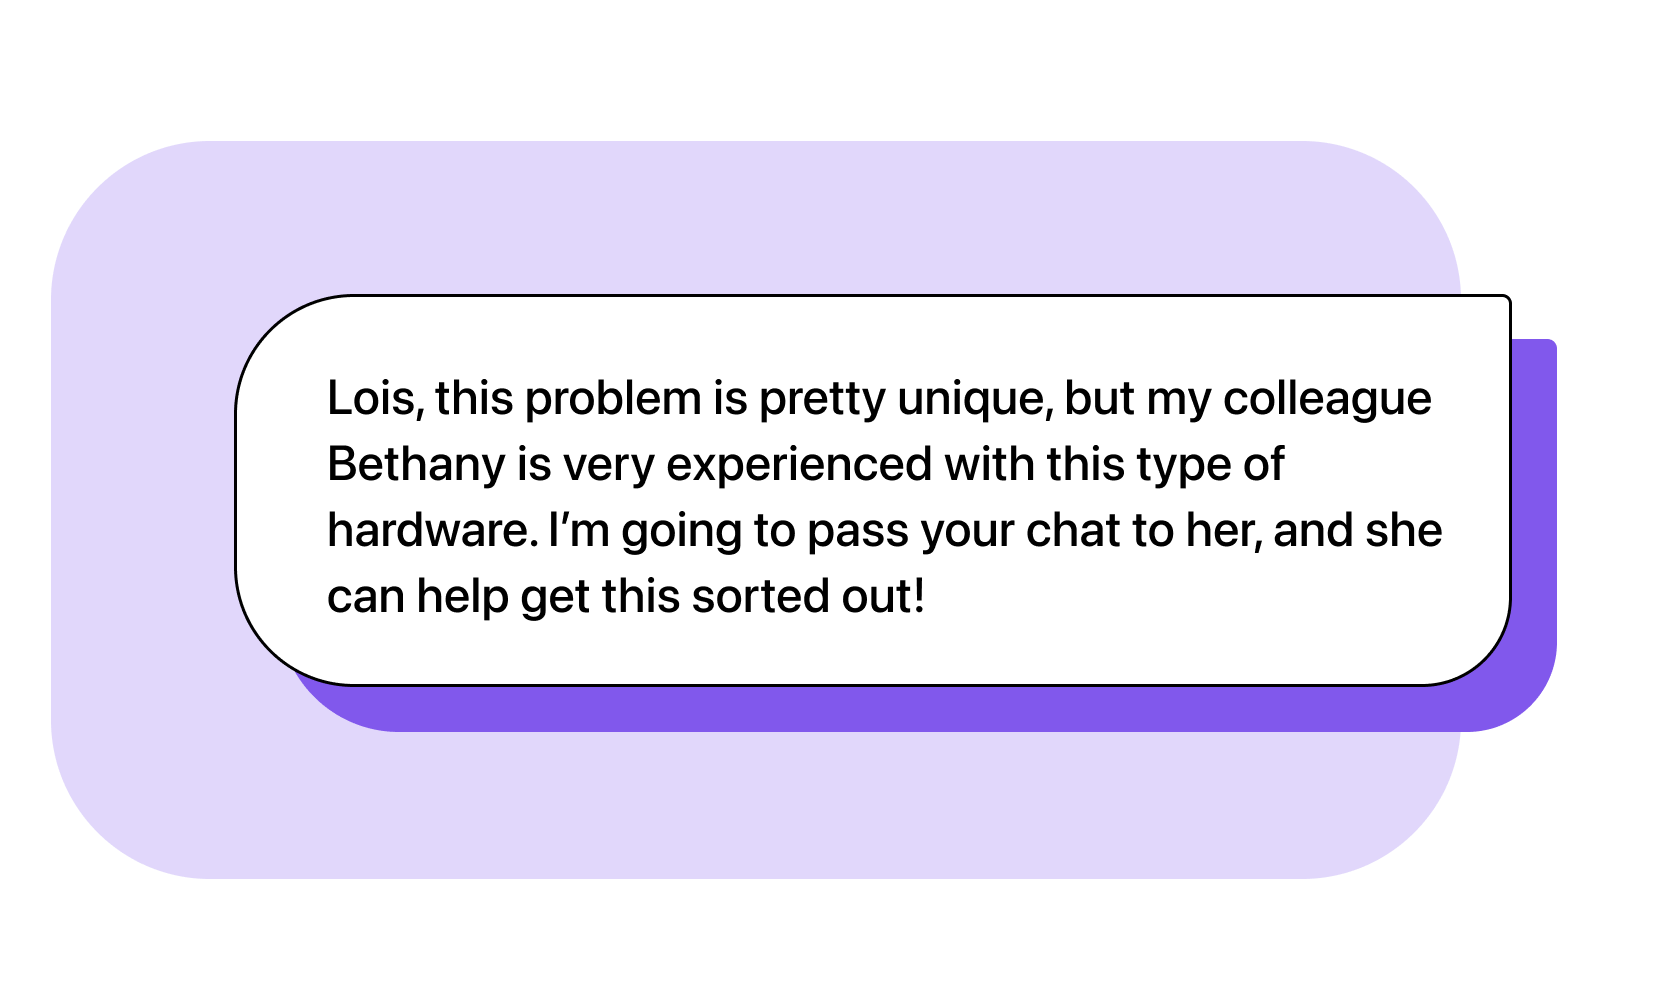 Agent: Lois, this problem is pretty unique, but my colleague Bethany is very experienced with this type of hardware. I’m going to pass your chat to her, and she can help get this sorted out!